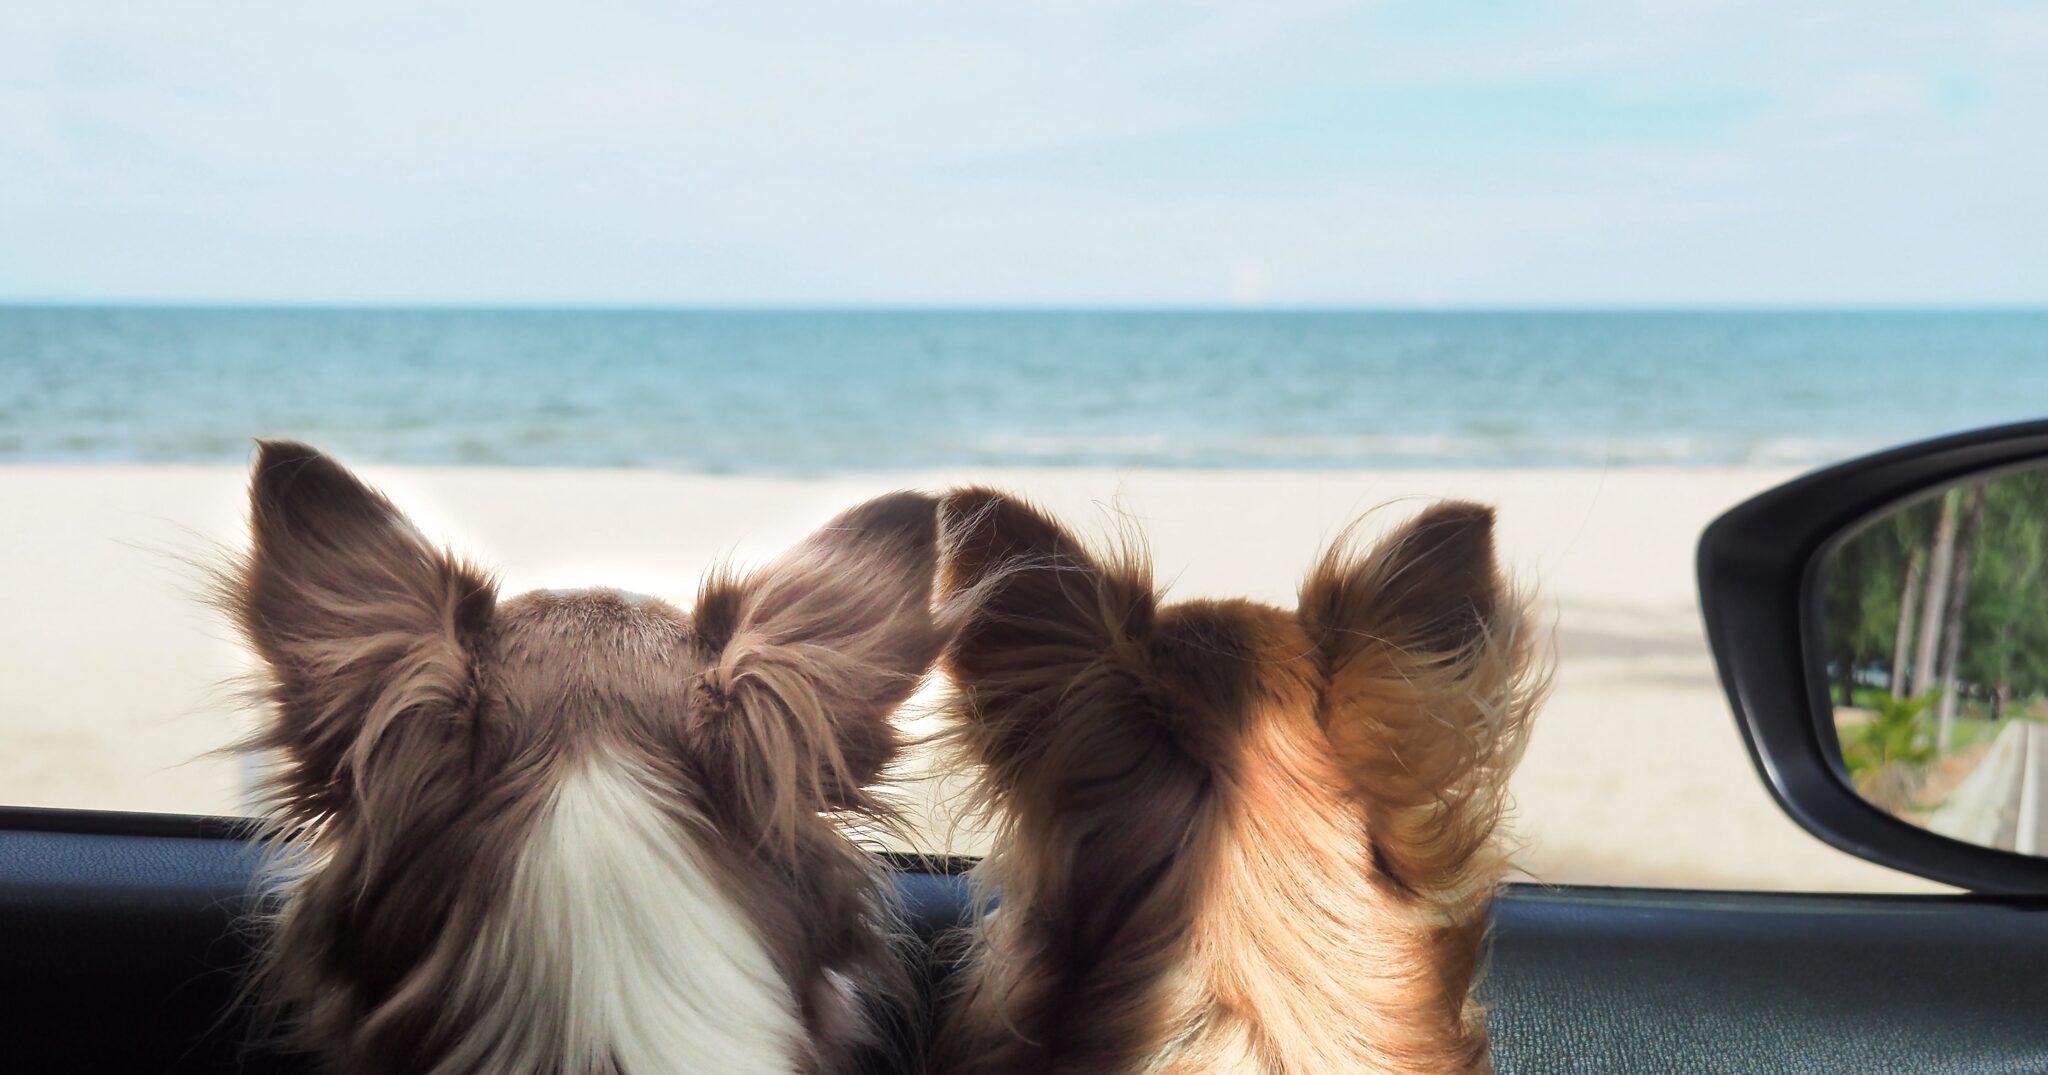 Two Dogs Looking Out a Car Window at the Beach